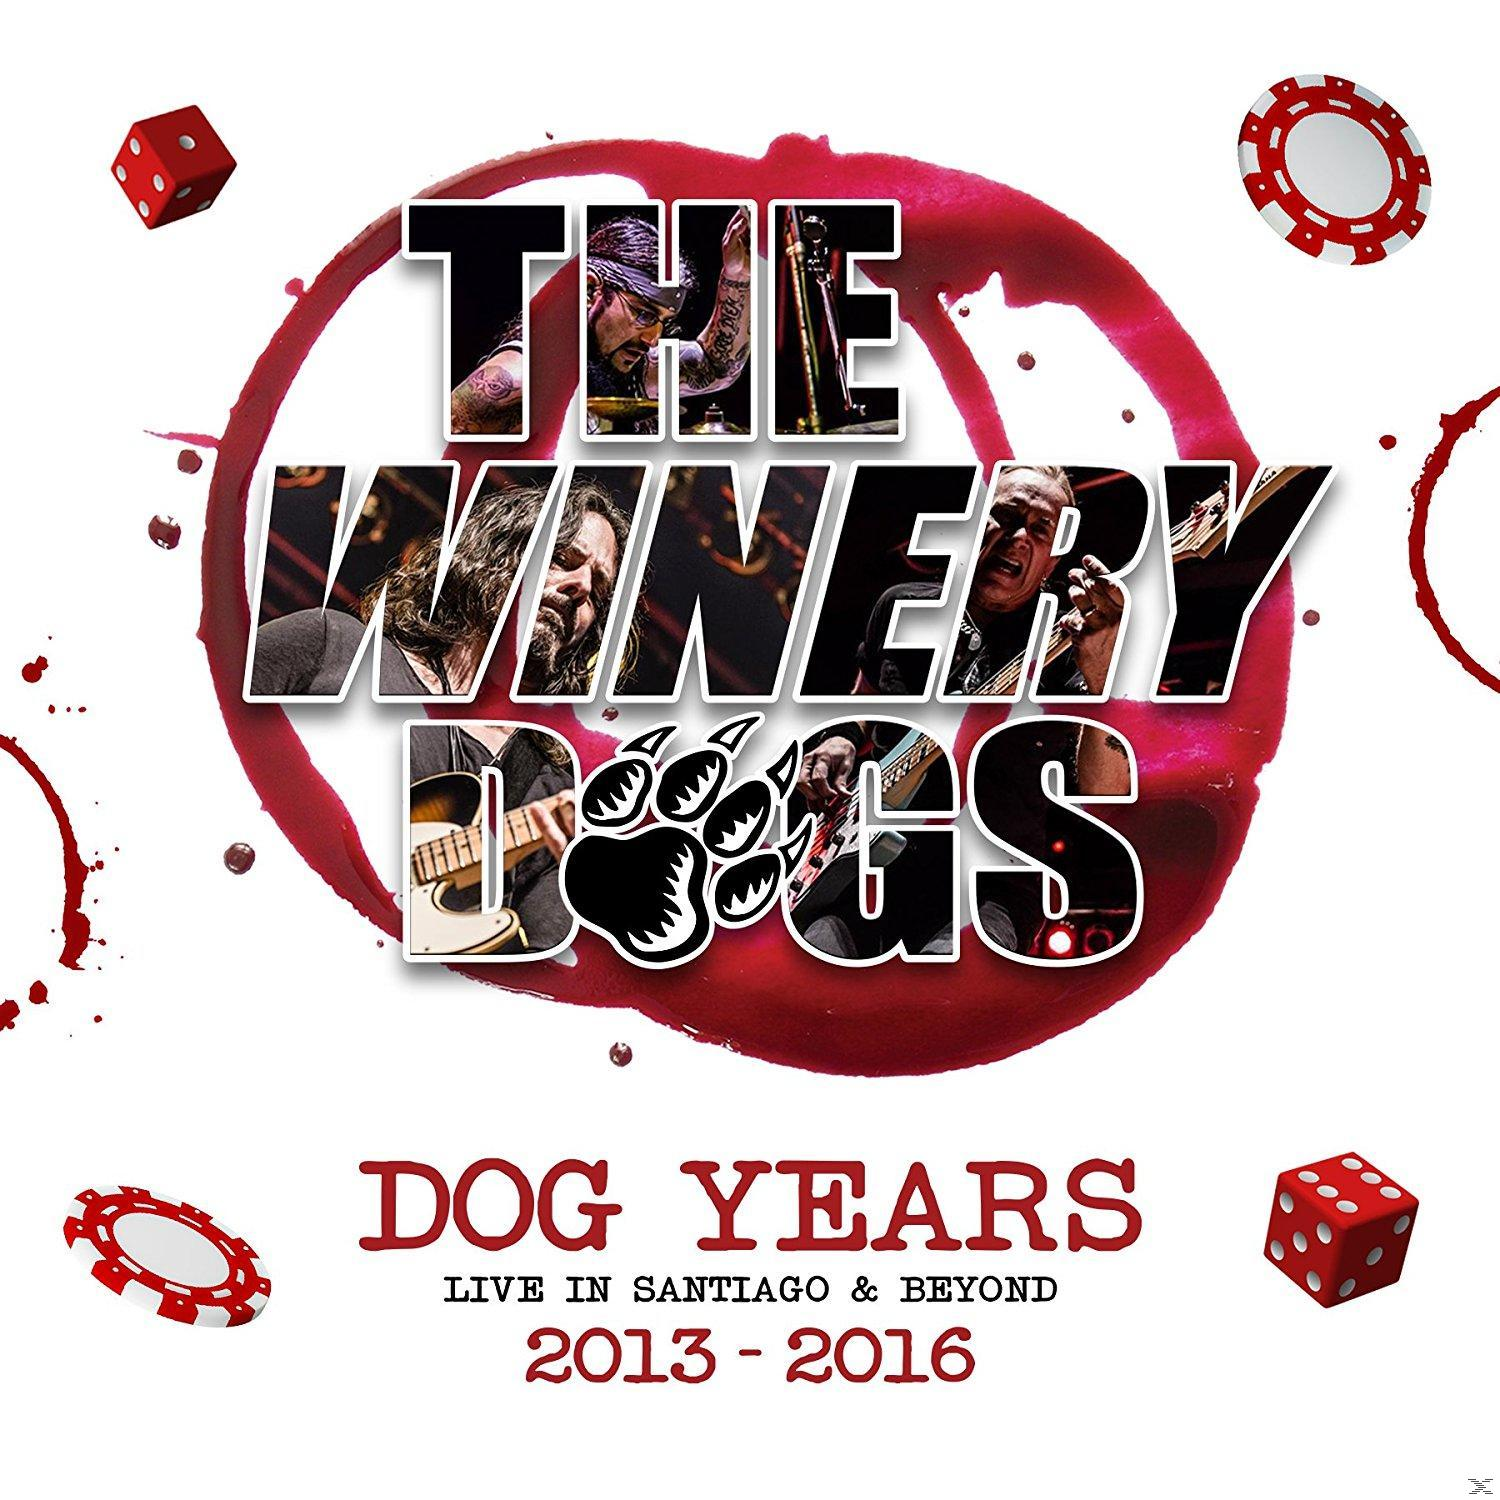 The 2013-2016 (Rec YEARS Live & Winery DOG Santiago - - Beyond In (Vinyl) Dogs